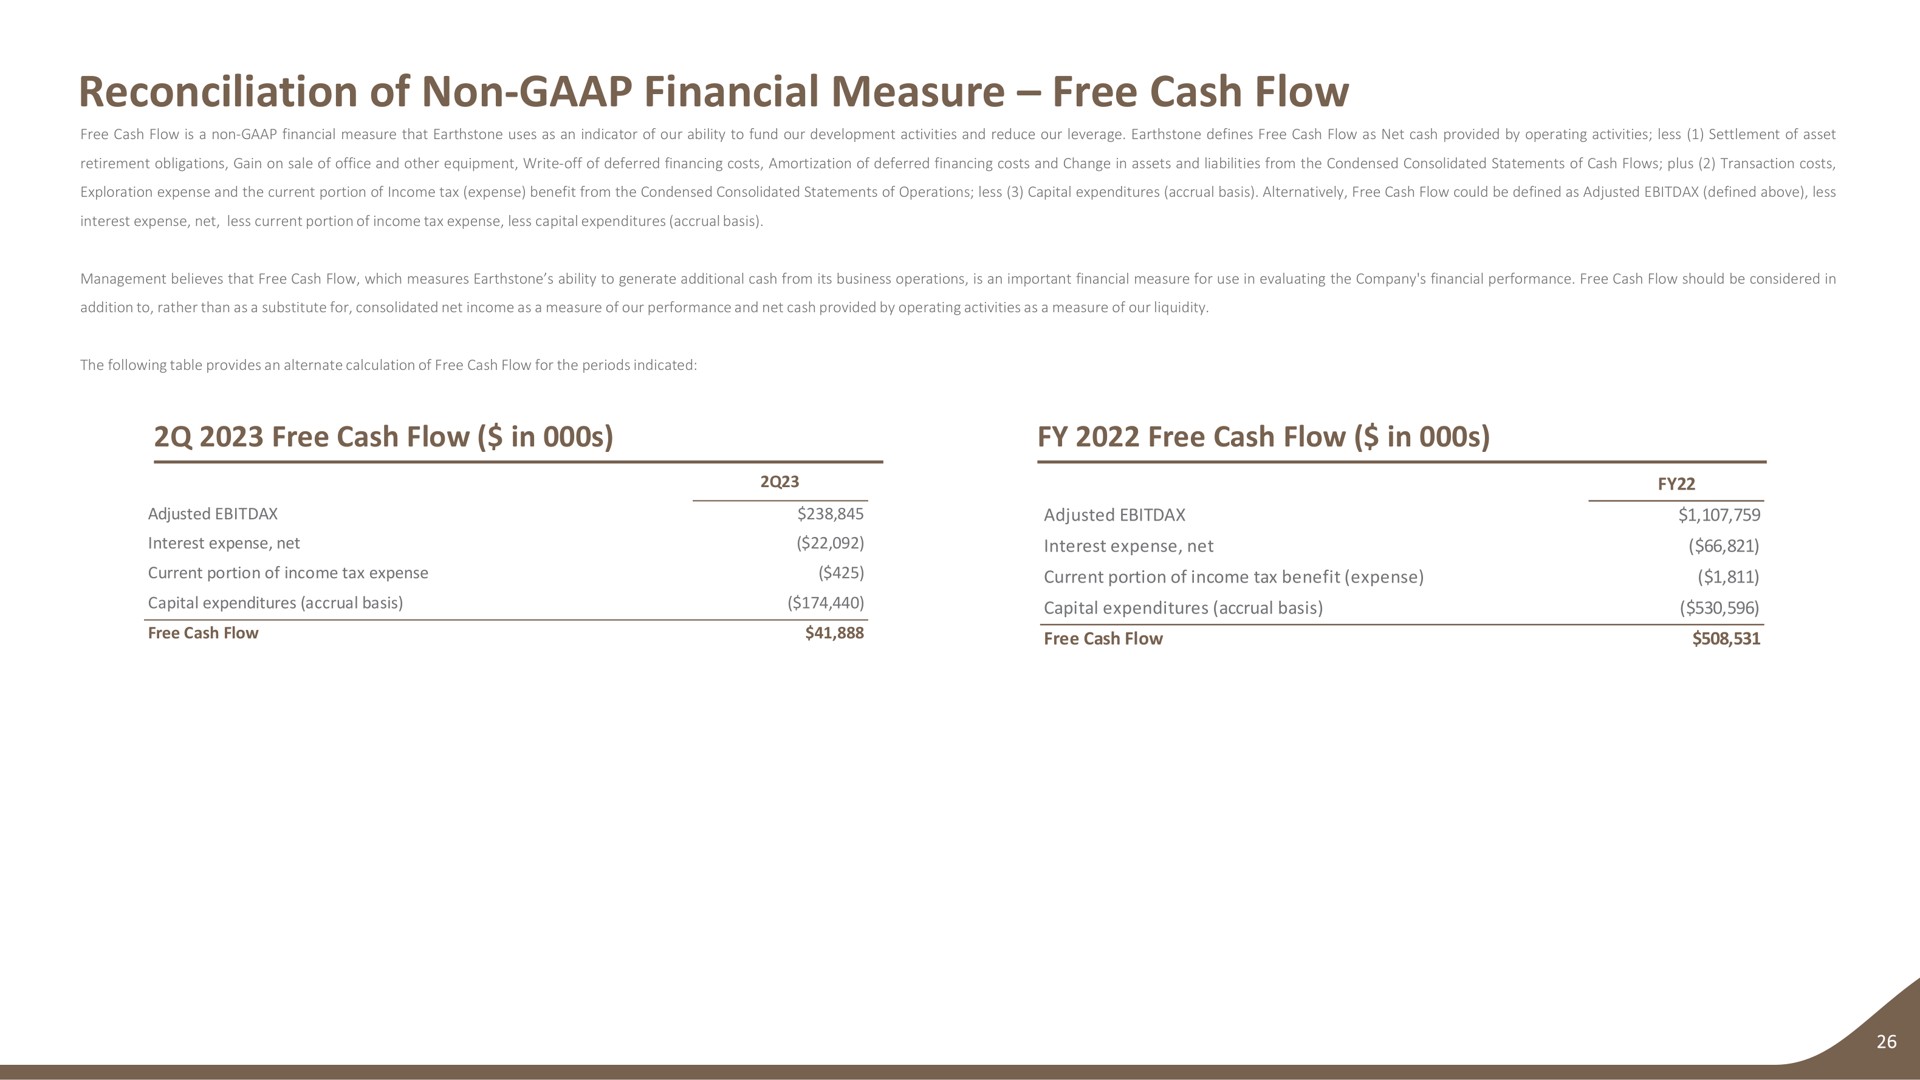 reconciliation of non financial measure free cash flow free cash flow in free cash flow in | Earthstone Energy